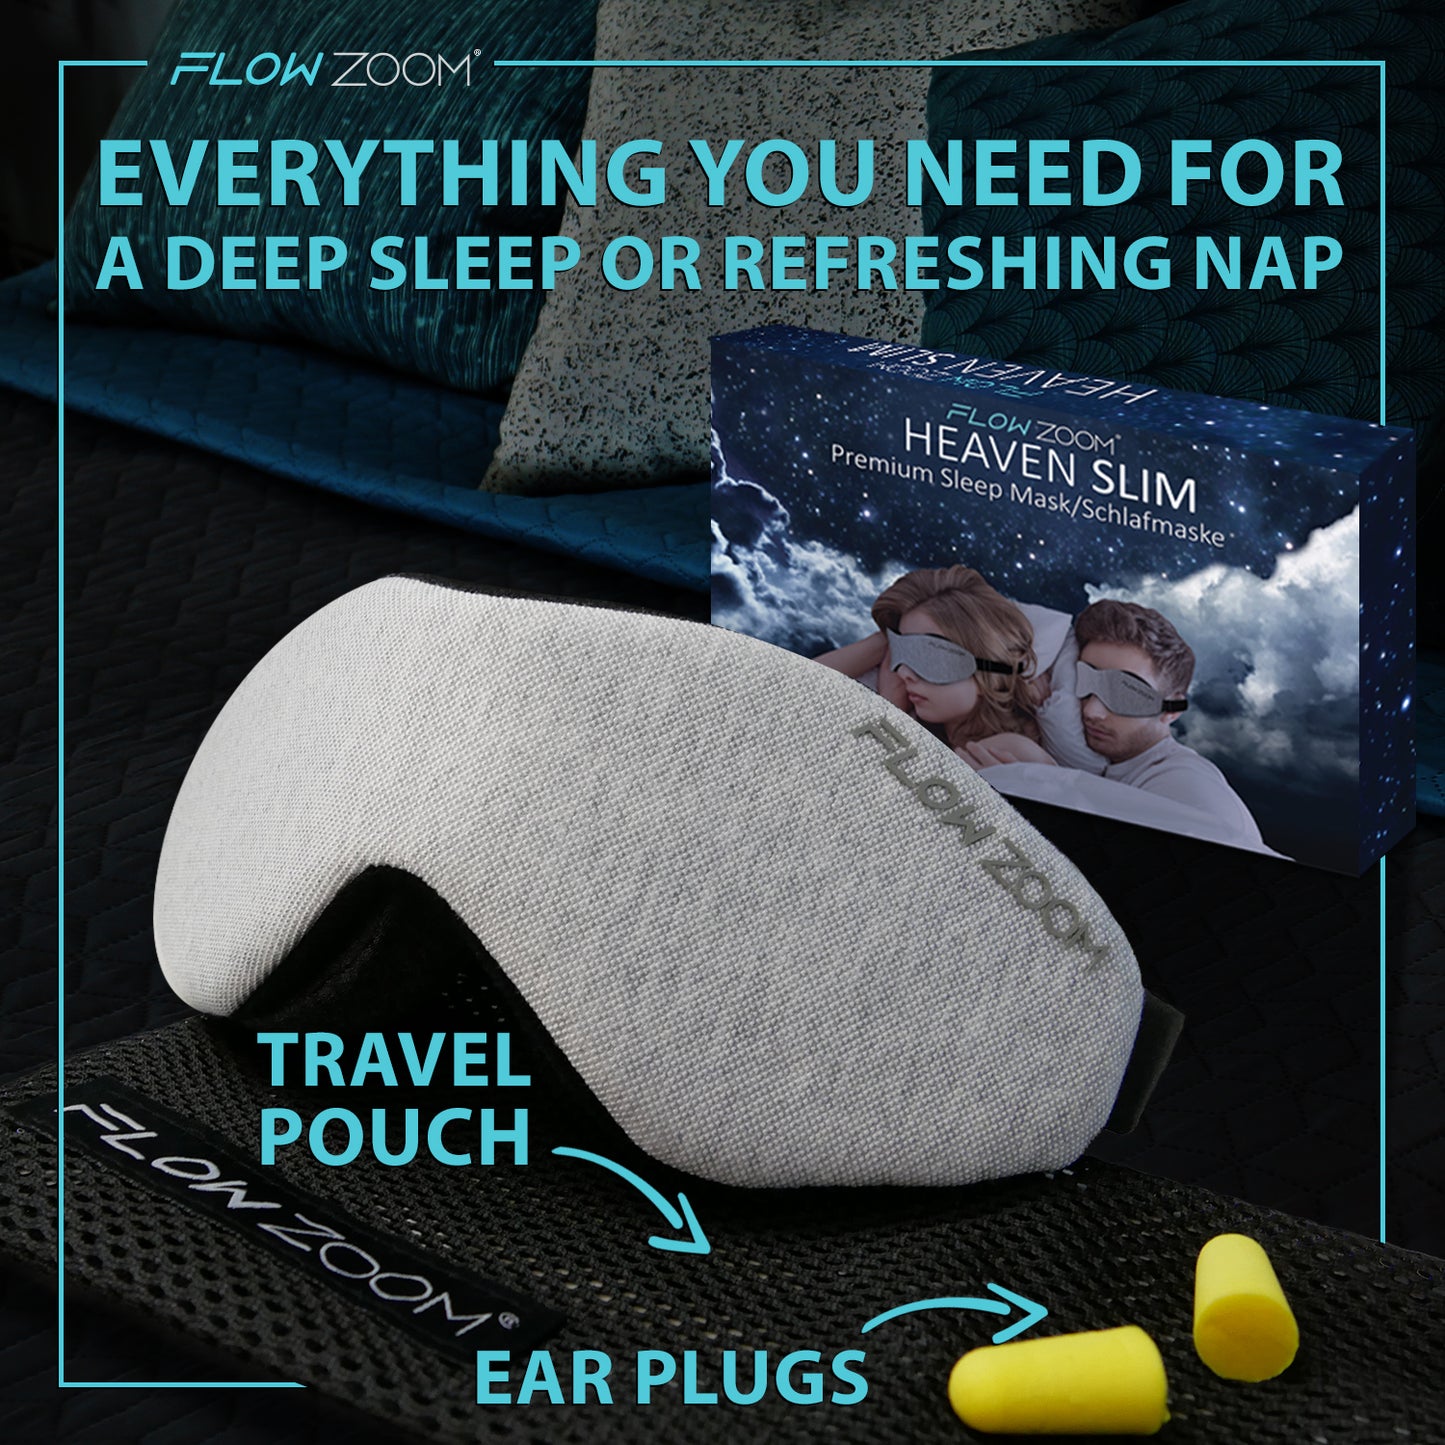 Sleep mask for travelling with carrying bag included